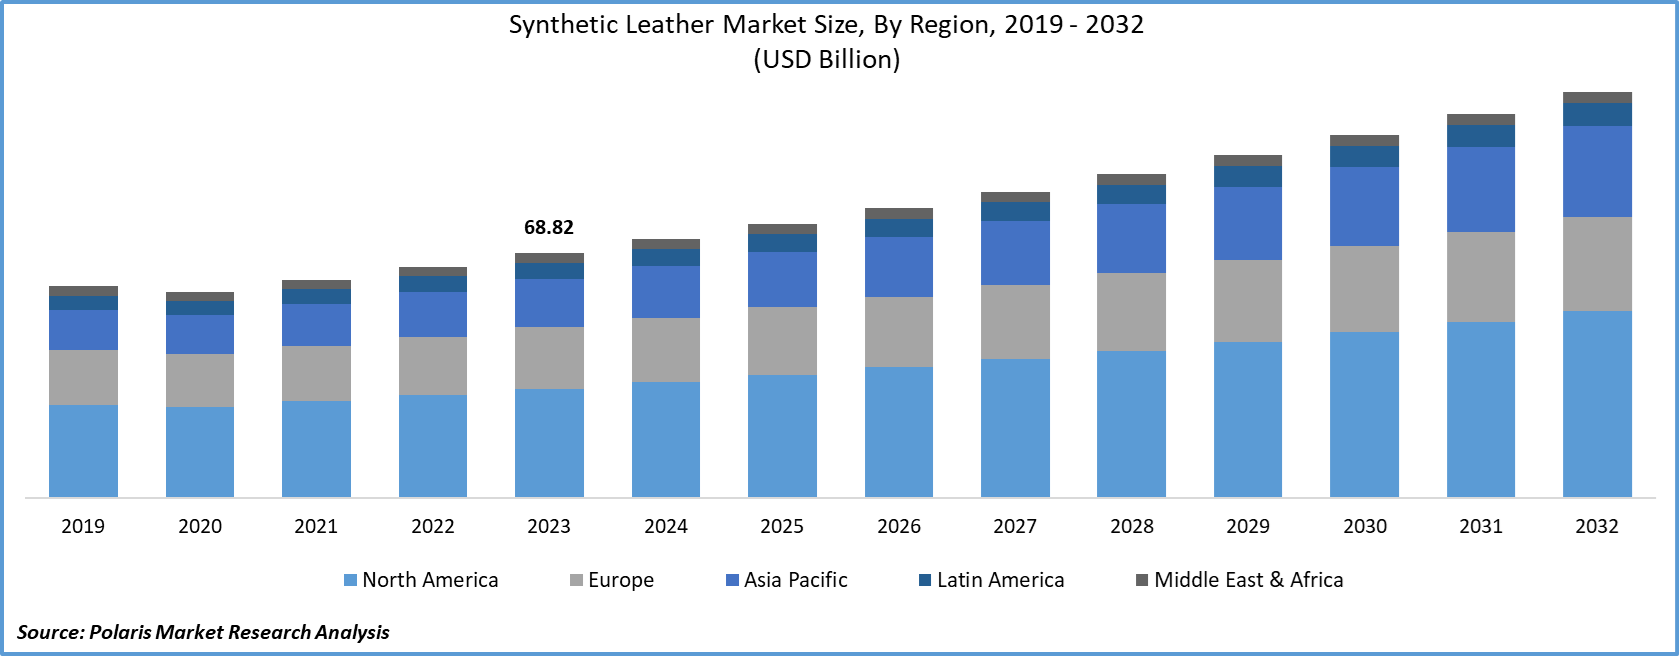 Synthetic Leather Market Size